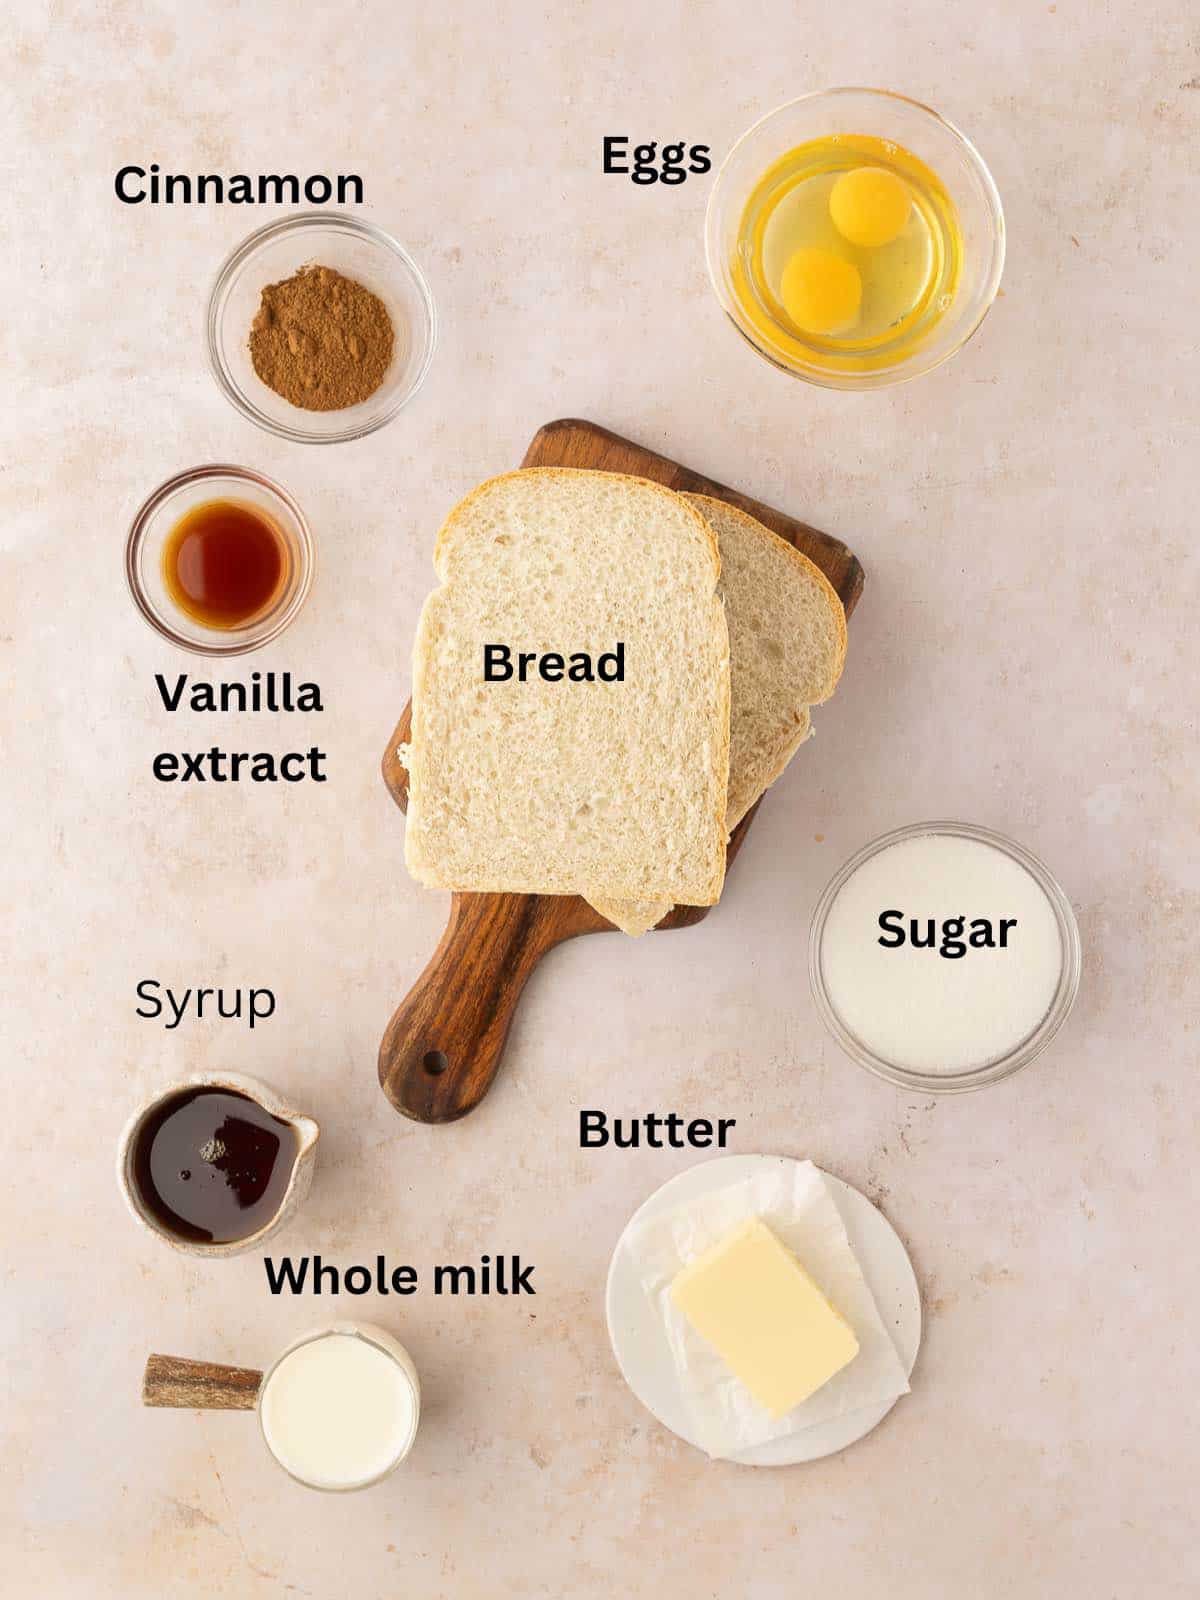 Ingredients on a counter include slices of bread, and bowls of syrup, eggs, sugar, and milk. 